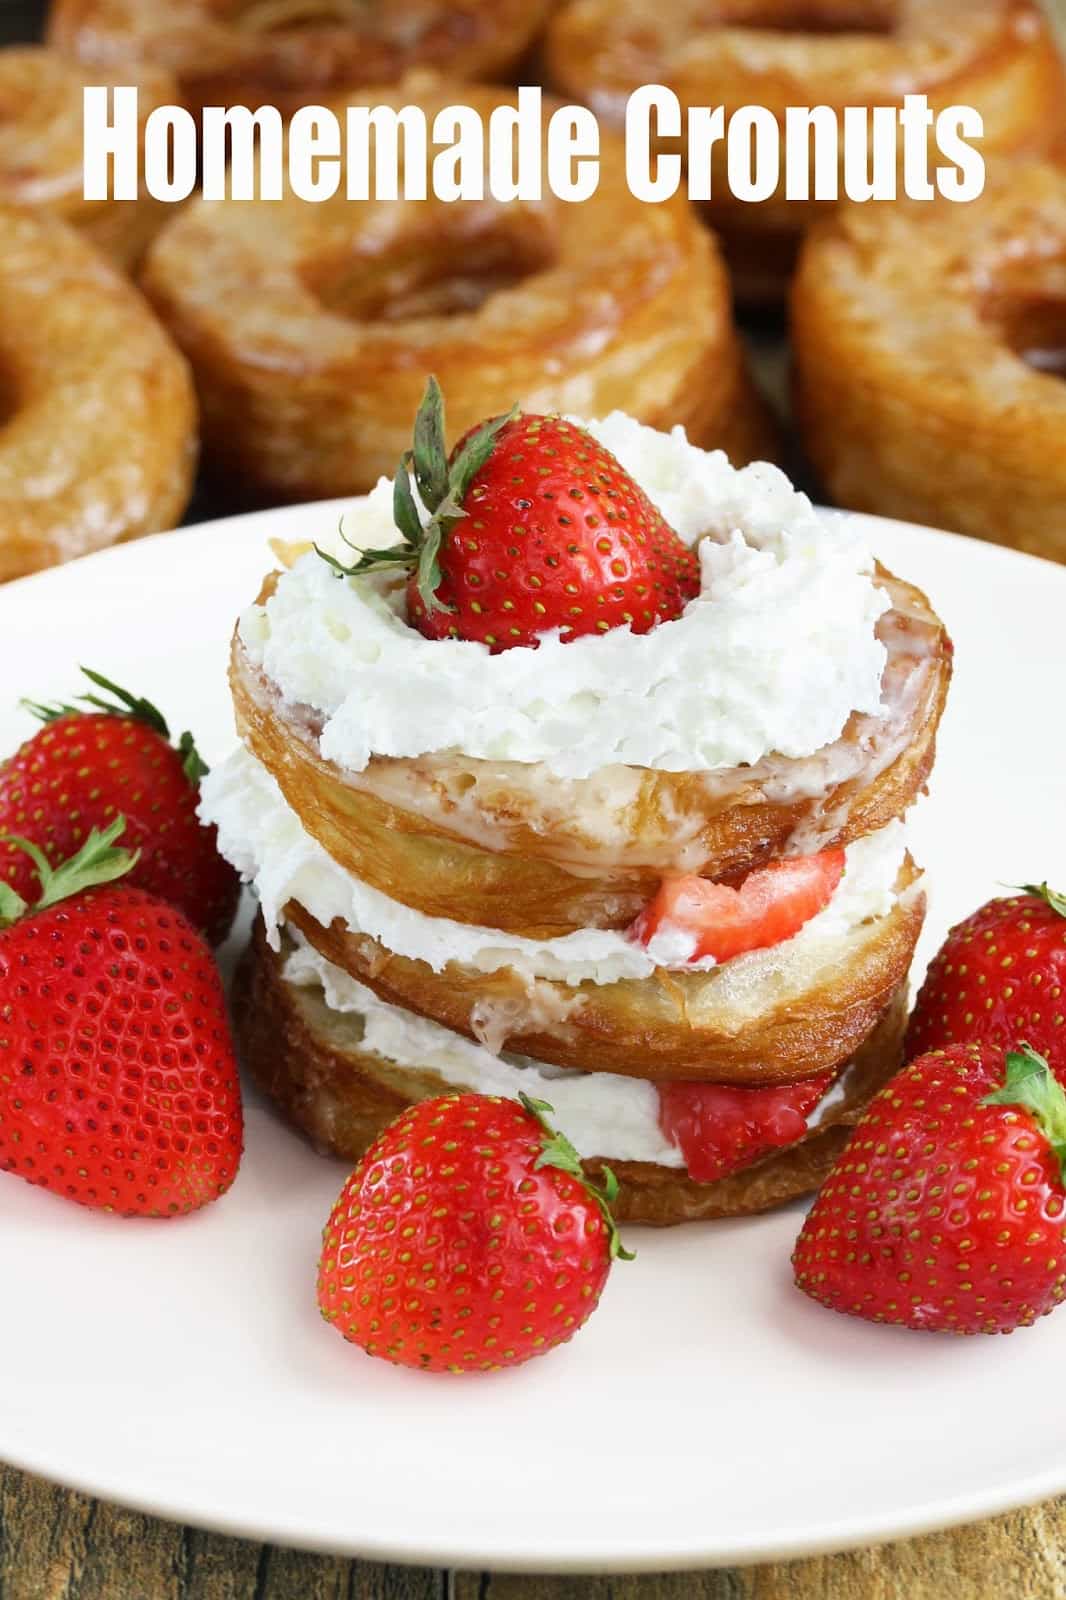 Homemade Cronuts: croissants and donuts combine for one amazing pastry called a cronut. These are shown in a stack layered with whipped cream and fresh strawberries.